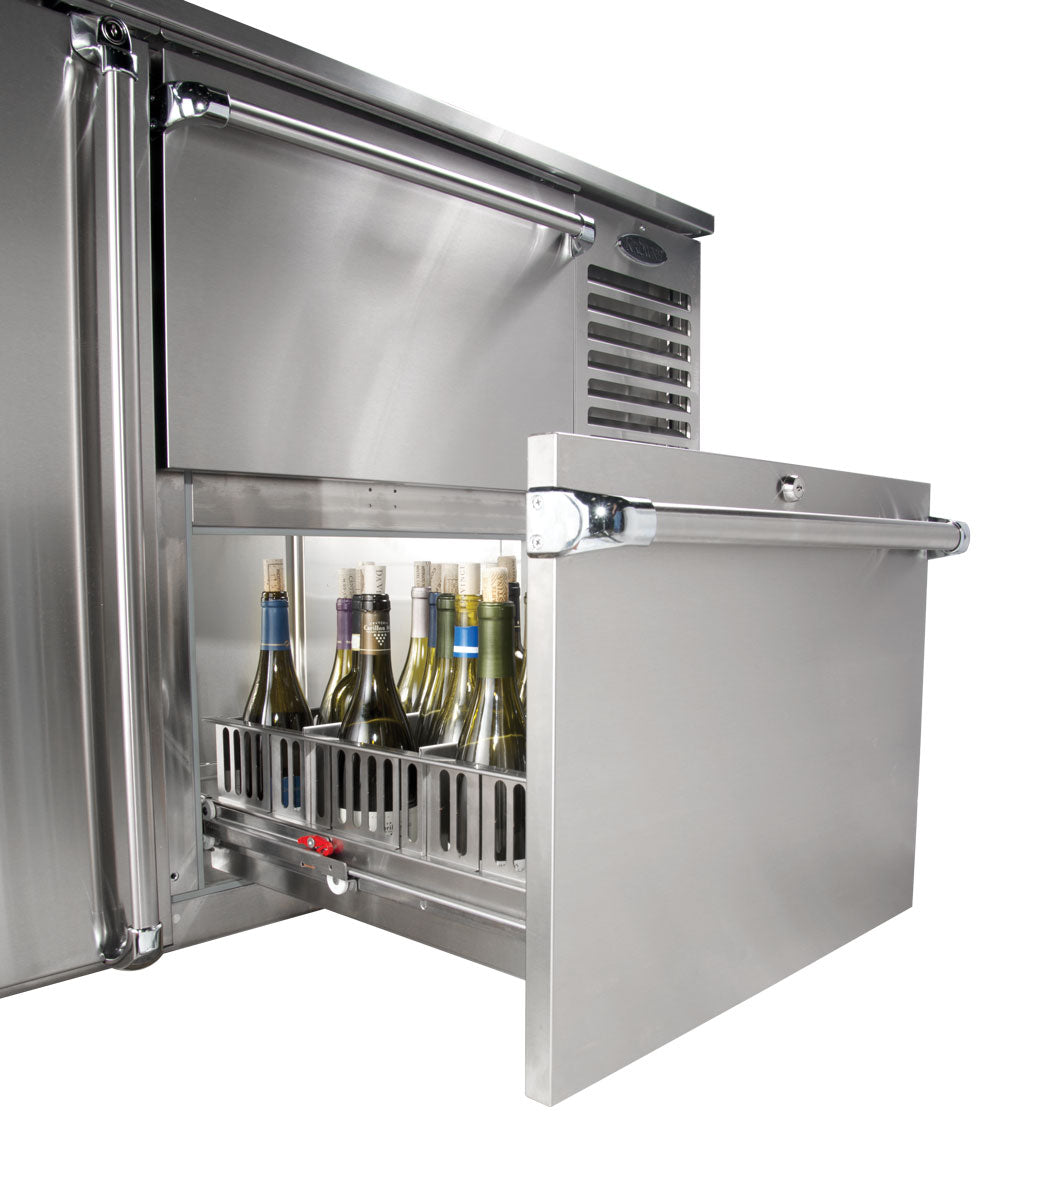 Krowne | 84" Wide 2 Glass Door/2 Drawer Self Contained Stainless Steel Reach-In Back Bar